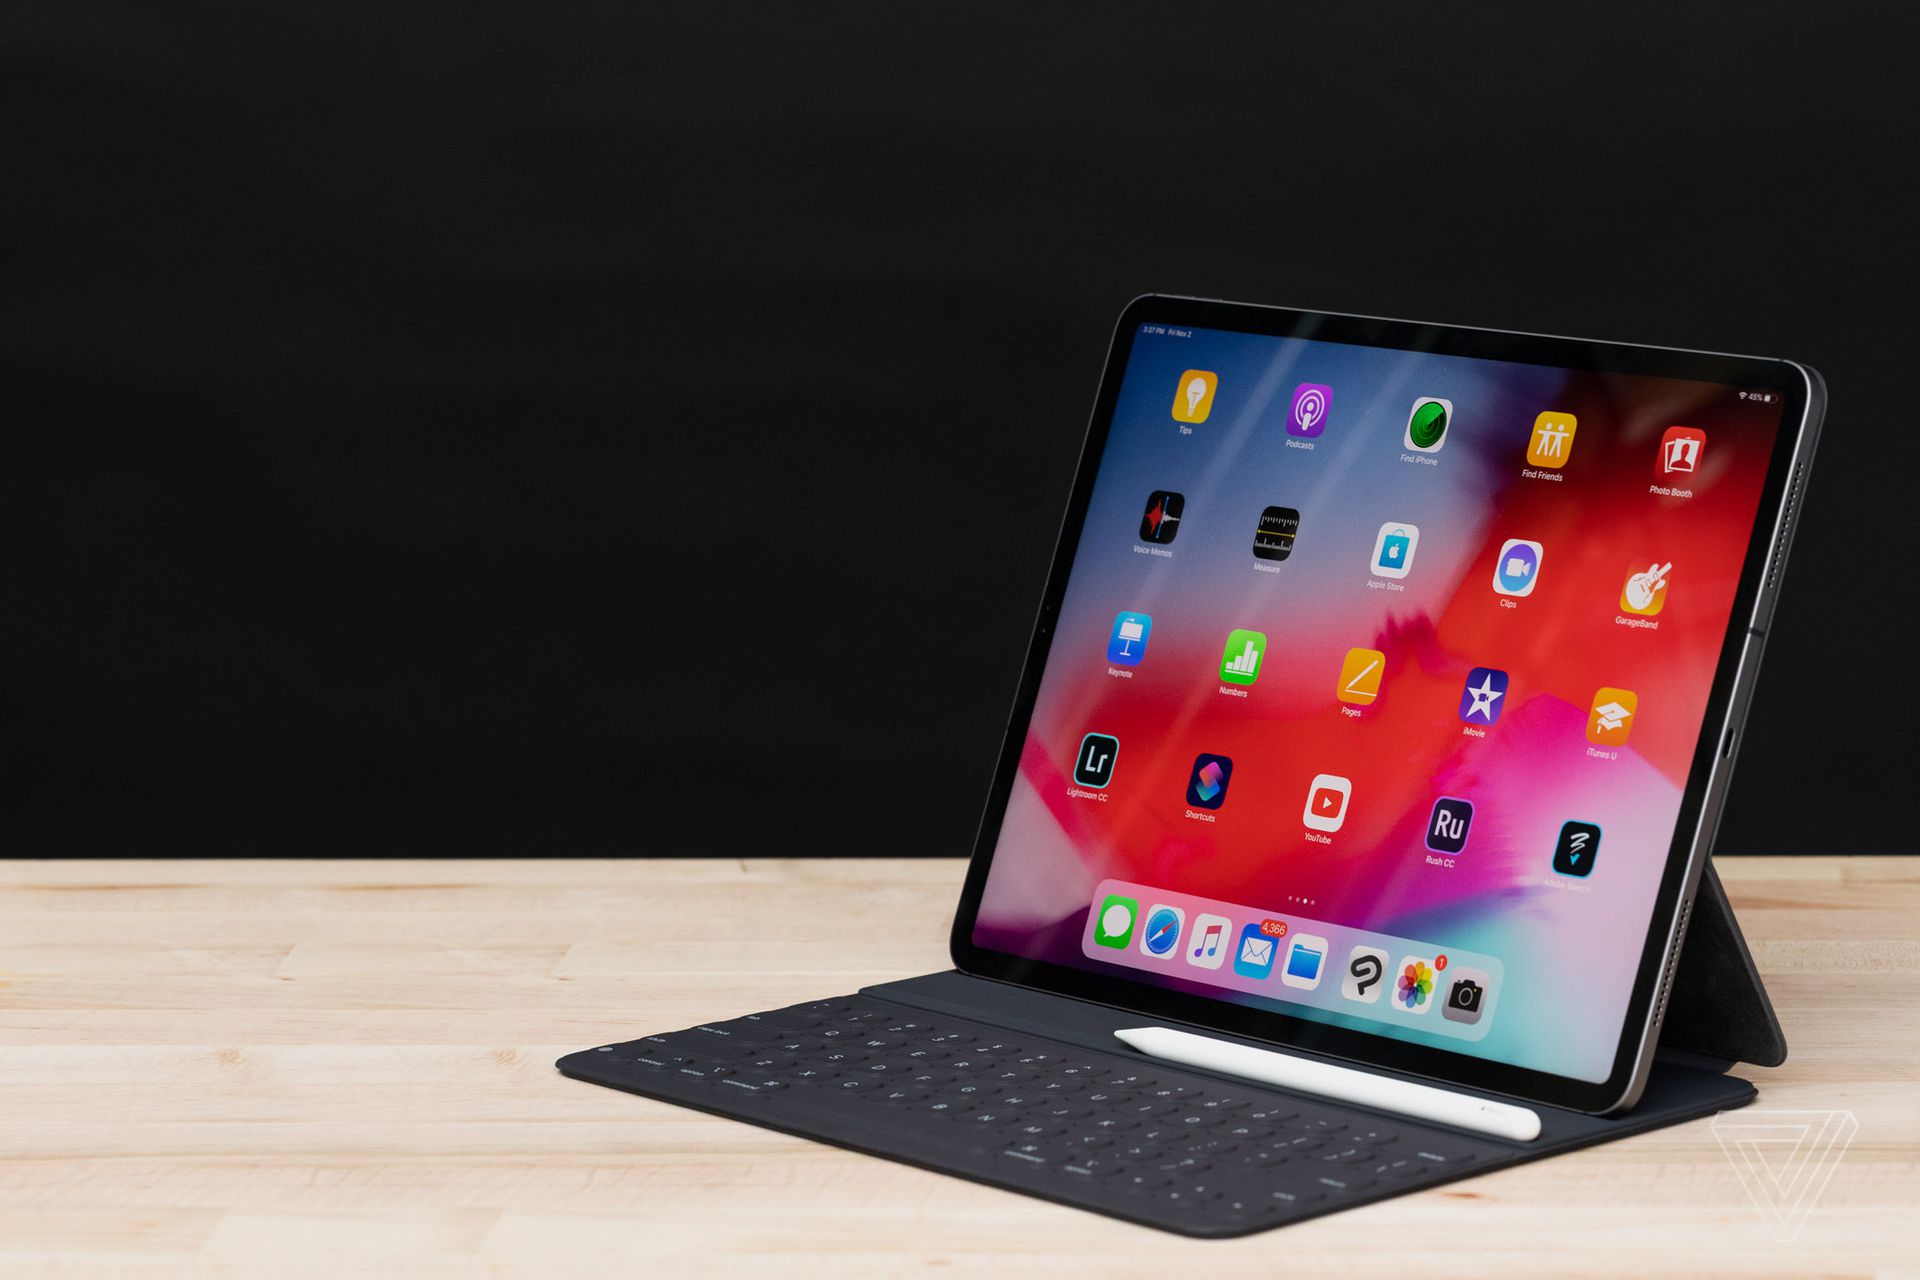 Apple’s next iPad Pro could come with a rear triplecamera array The